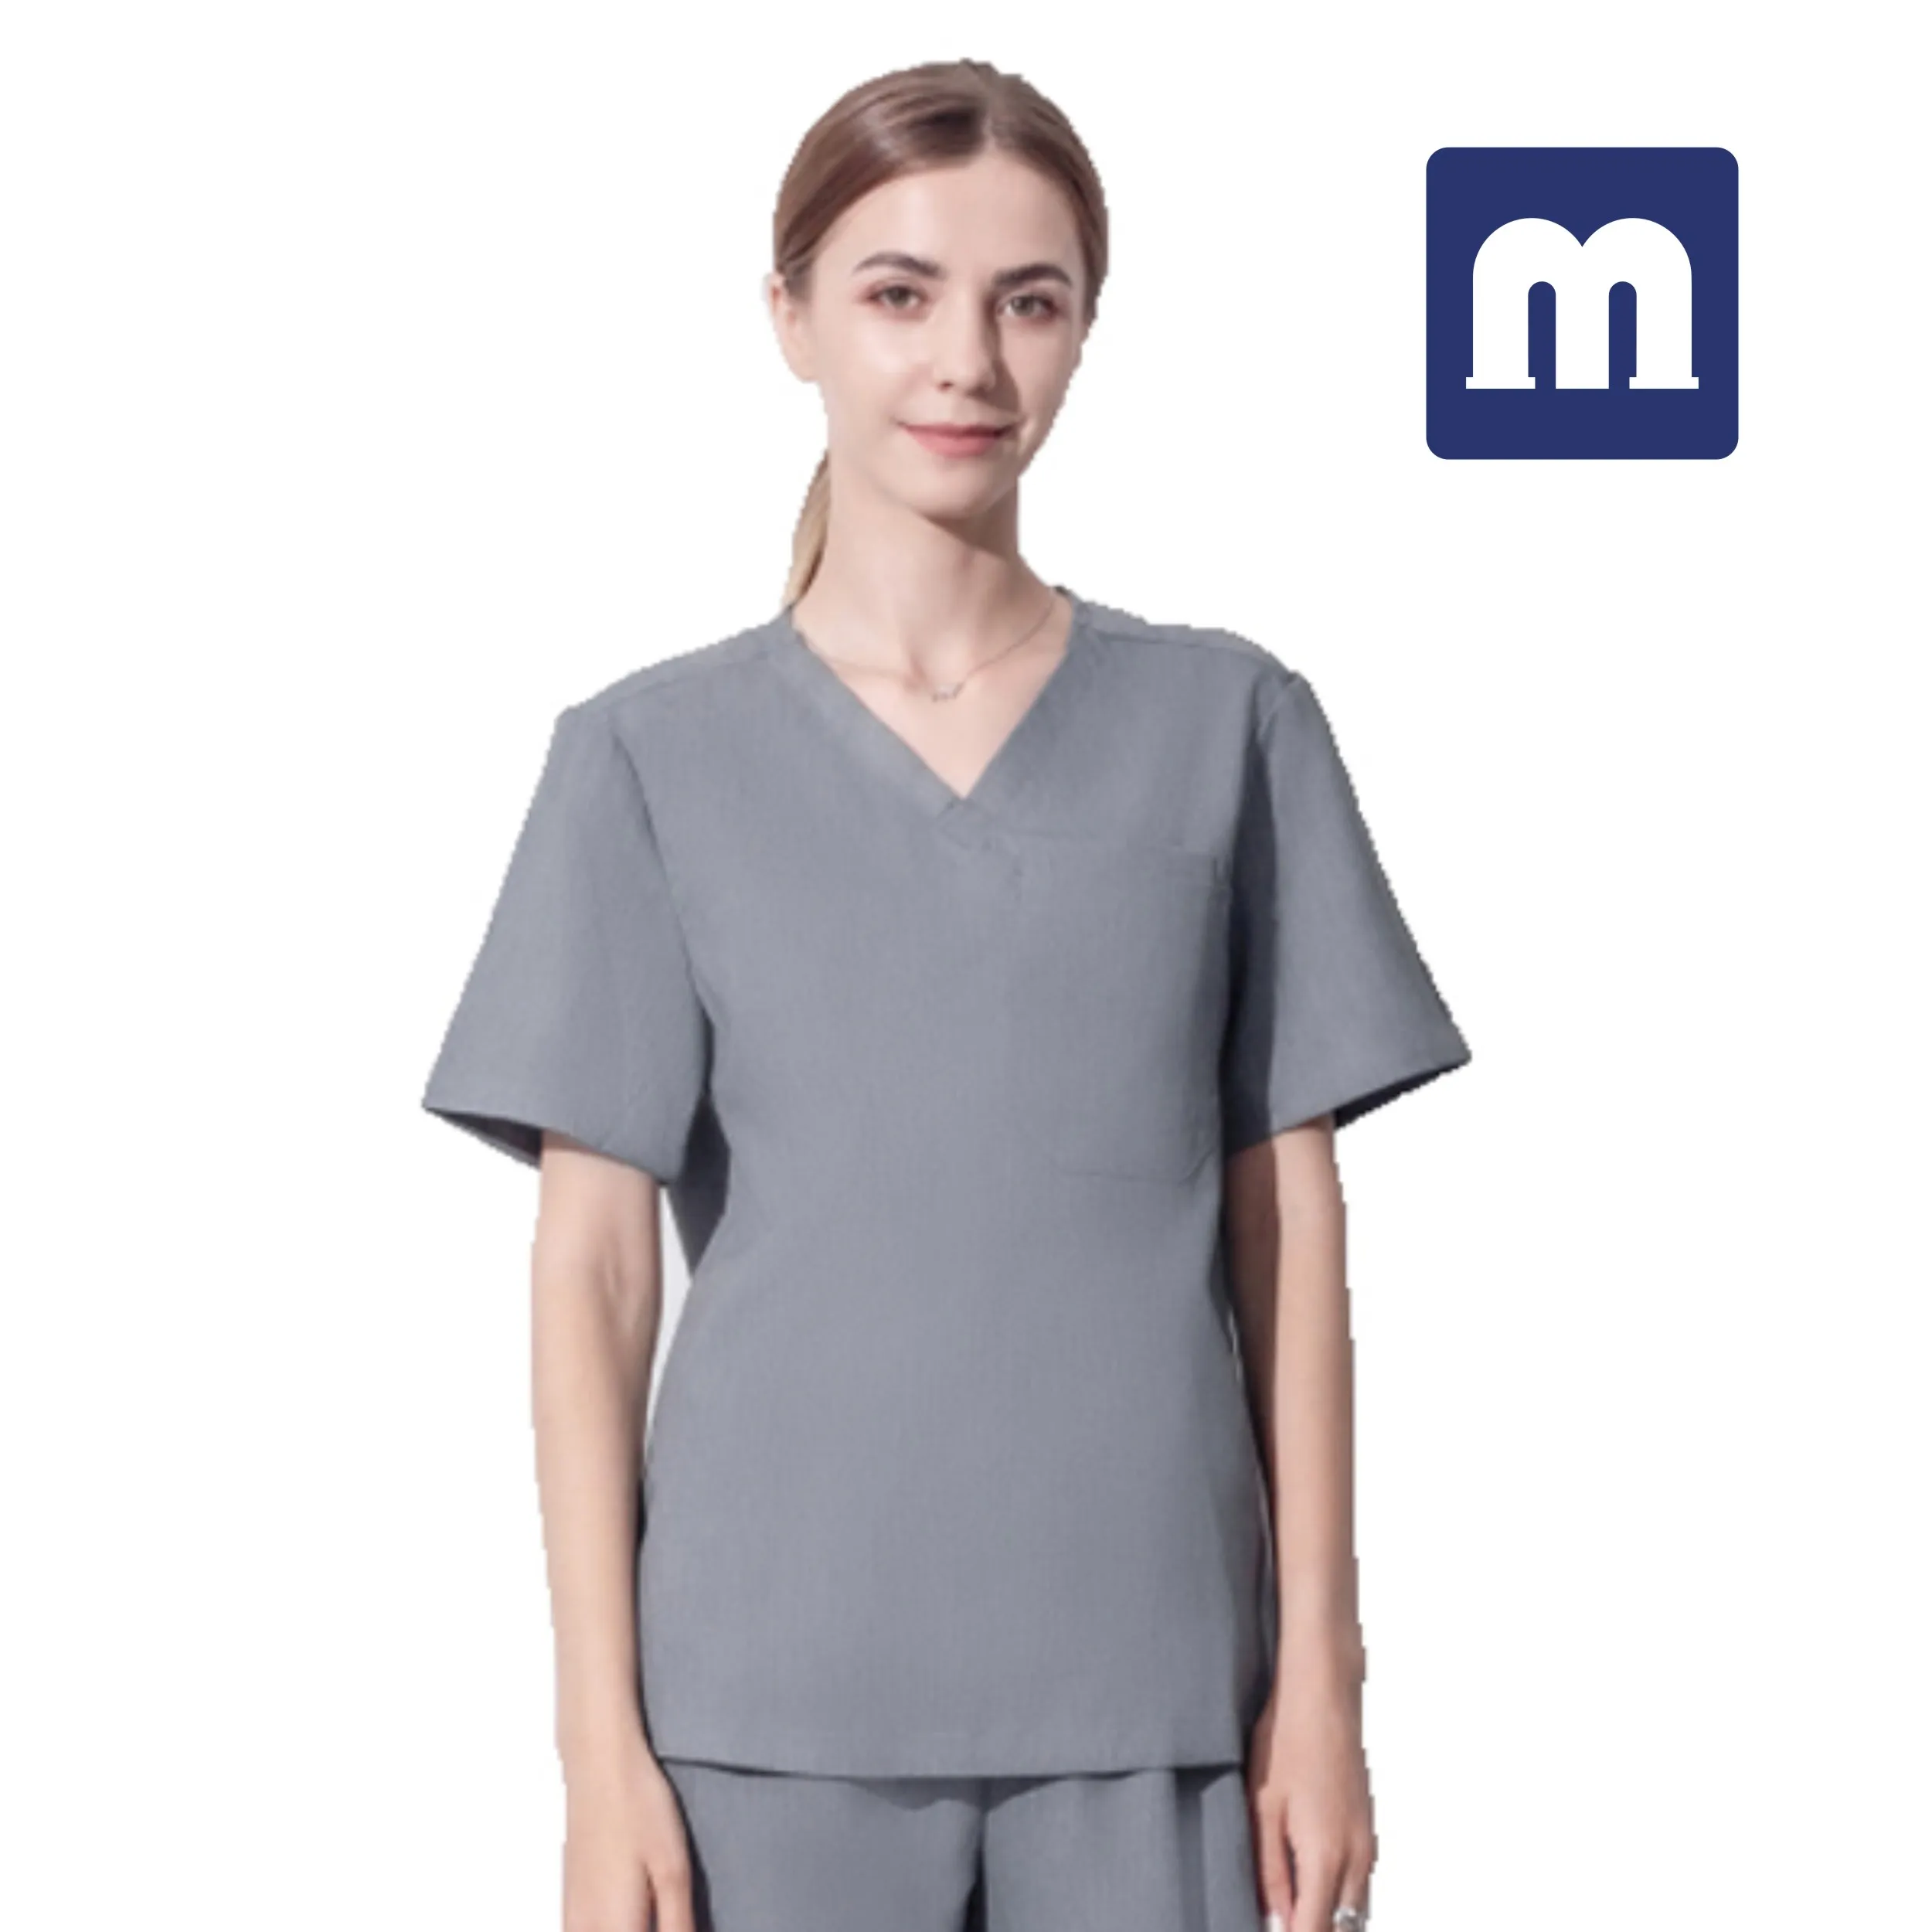 Medigo 008 Womens Two Pocket Mandarin Collar Scrubs Top And Lycra Pants And  Shirt Super Soft, Stretchy, Anti Wrinkle Medical Scrububs For Relaxed Fit  And Hospital Uniforms From Medigo, $25.63